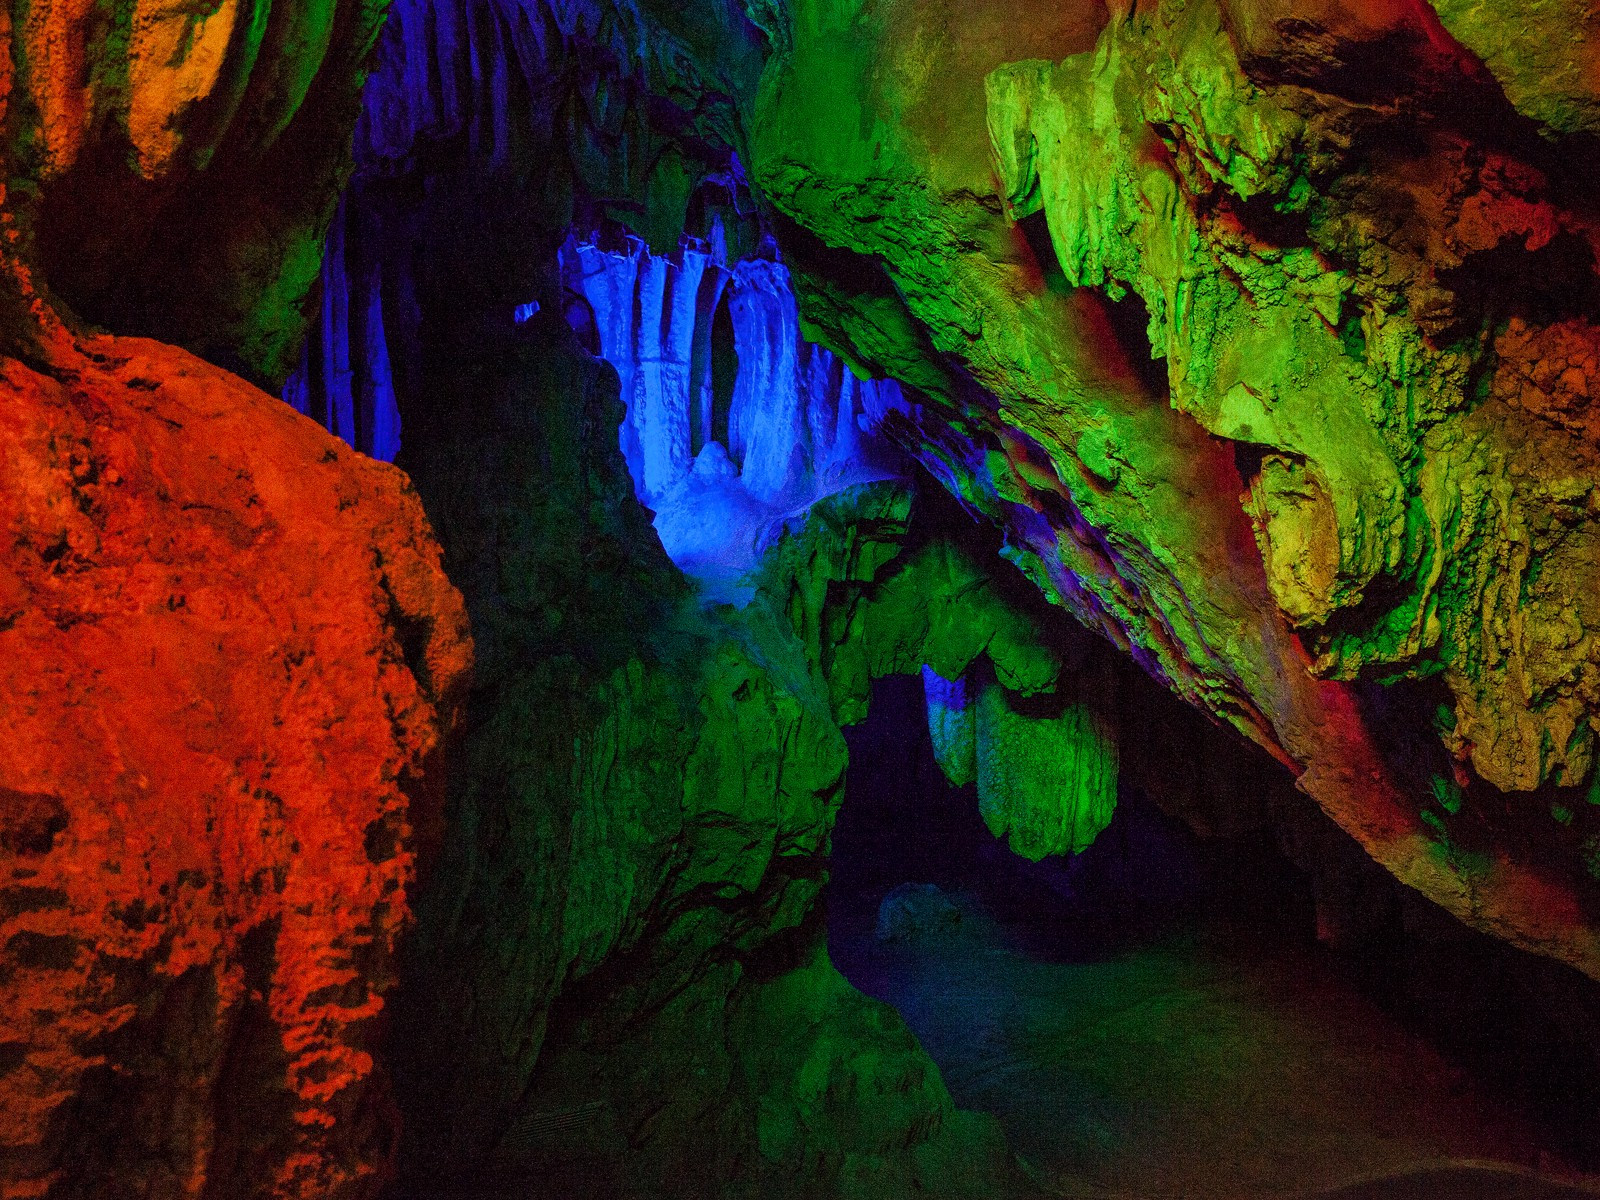 17. Reed Flute Cave, Guilin